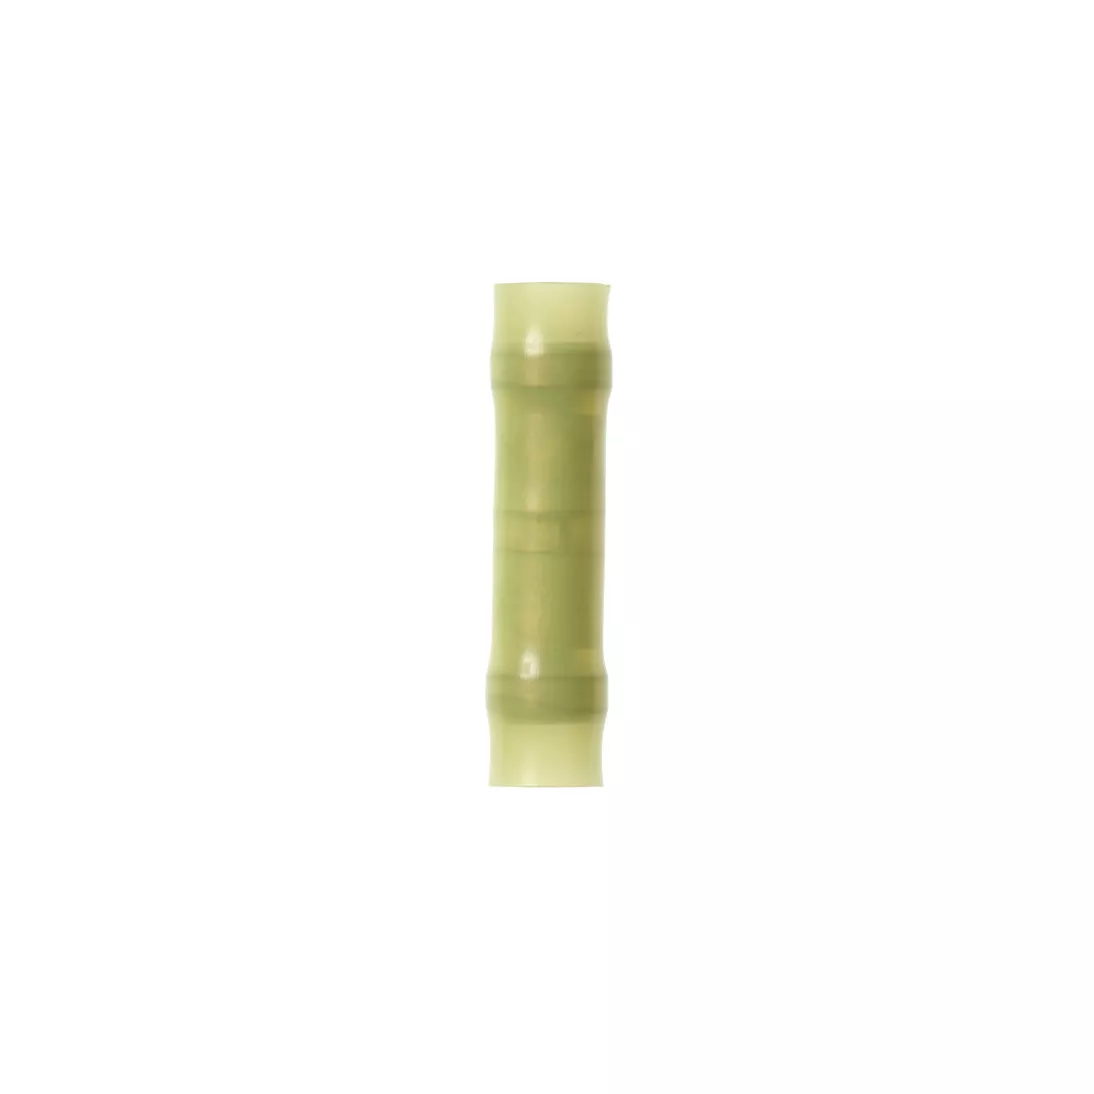 3M™ Scotchlok™ Butt Connector, Nylon Insulated w/Insulation Grip
MNG10BCK, 12-10 AWG, 1/Case